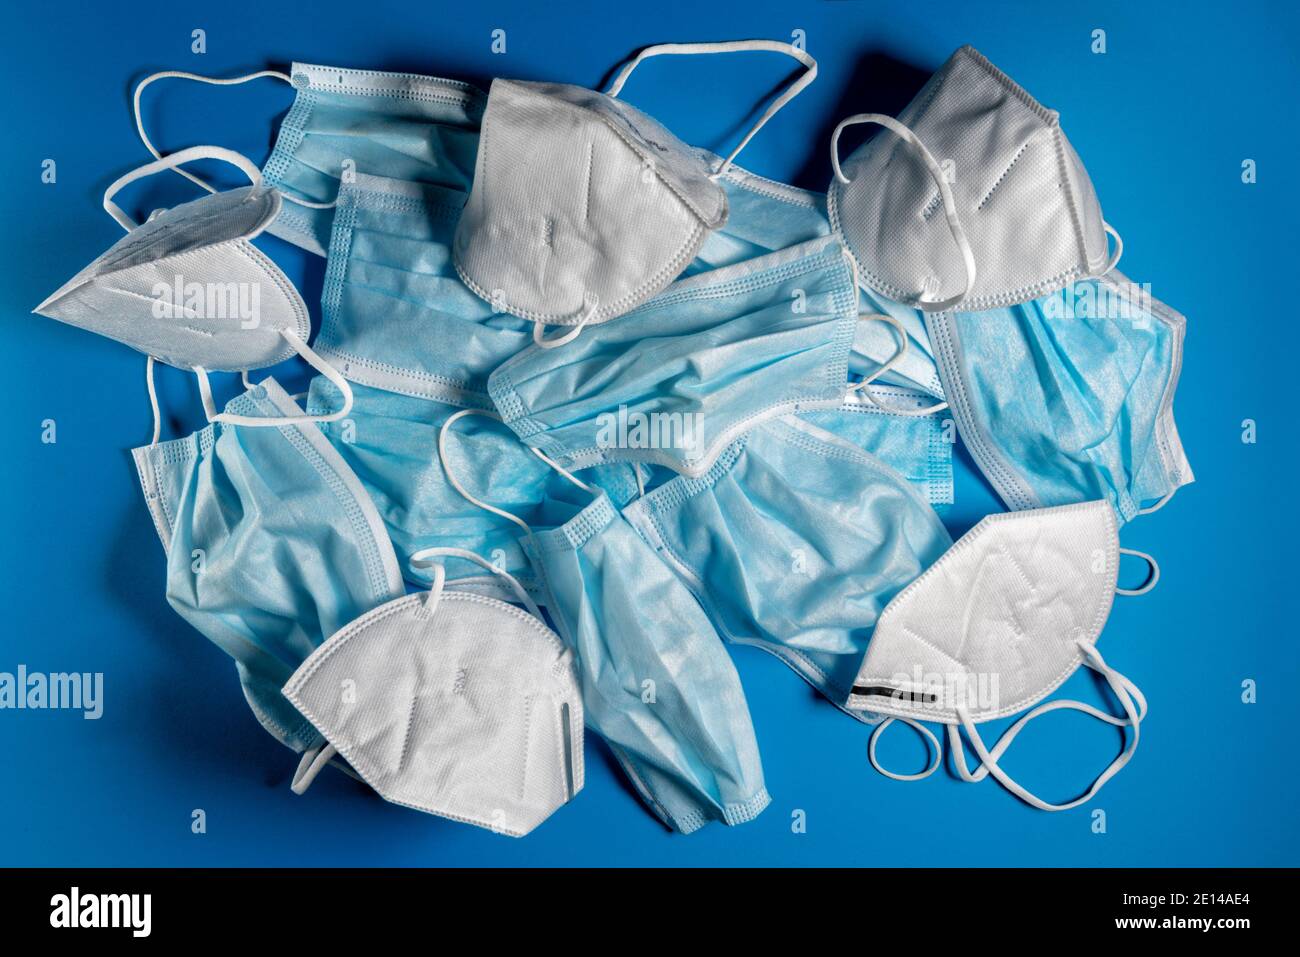 KN95 or FFP2 masks and surgical face masks used on blue background. Medical mask for Covid-19 protection - ecological recycling concept Stock Photo